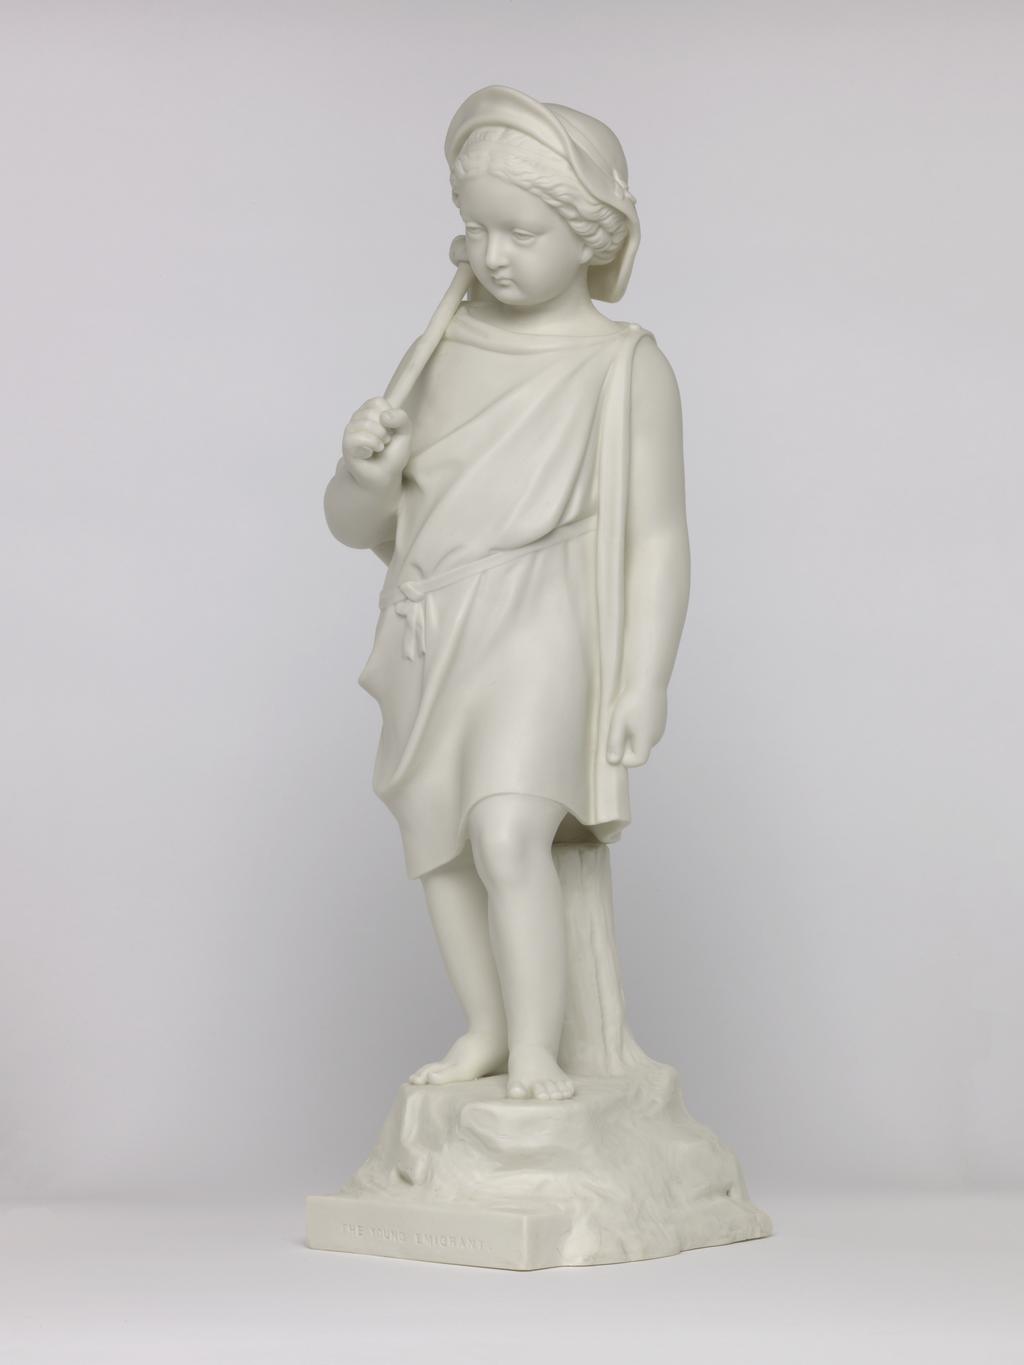 An image of Figure. The Young Emigrant [sic]. Copeland, England, Staffordshire, Stoke-on-Trent. Inscriptions: title; Front of base; marked; THE YOUNG EMIGRANT. Maker's name; reverse of bust; marked; COPYRIGHT RESERVED. COPELAND. Parian (porcelain), slip-cast, height, 52.3 cm, length, 16.7 cm, width, 15.7 cm, length, base, 15.7 cm. Acquisition Credit: Accepted by H. M. Government in lieu of Inheritance Tax from the estate of G. D. V. Glynn, and allocated to the Fitzwilliam Museum.